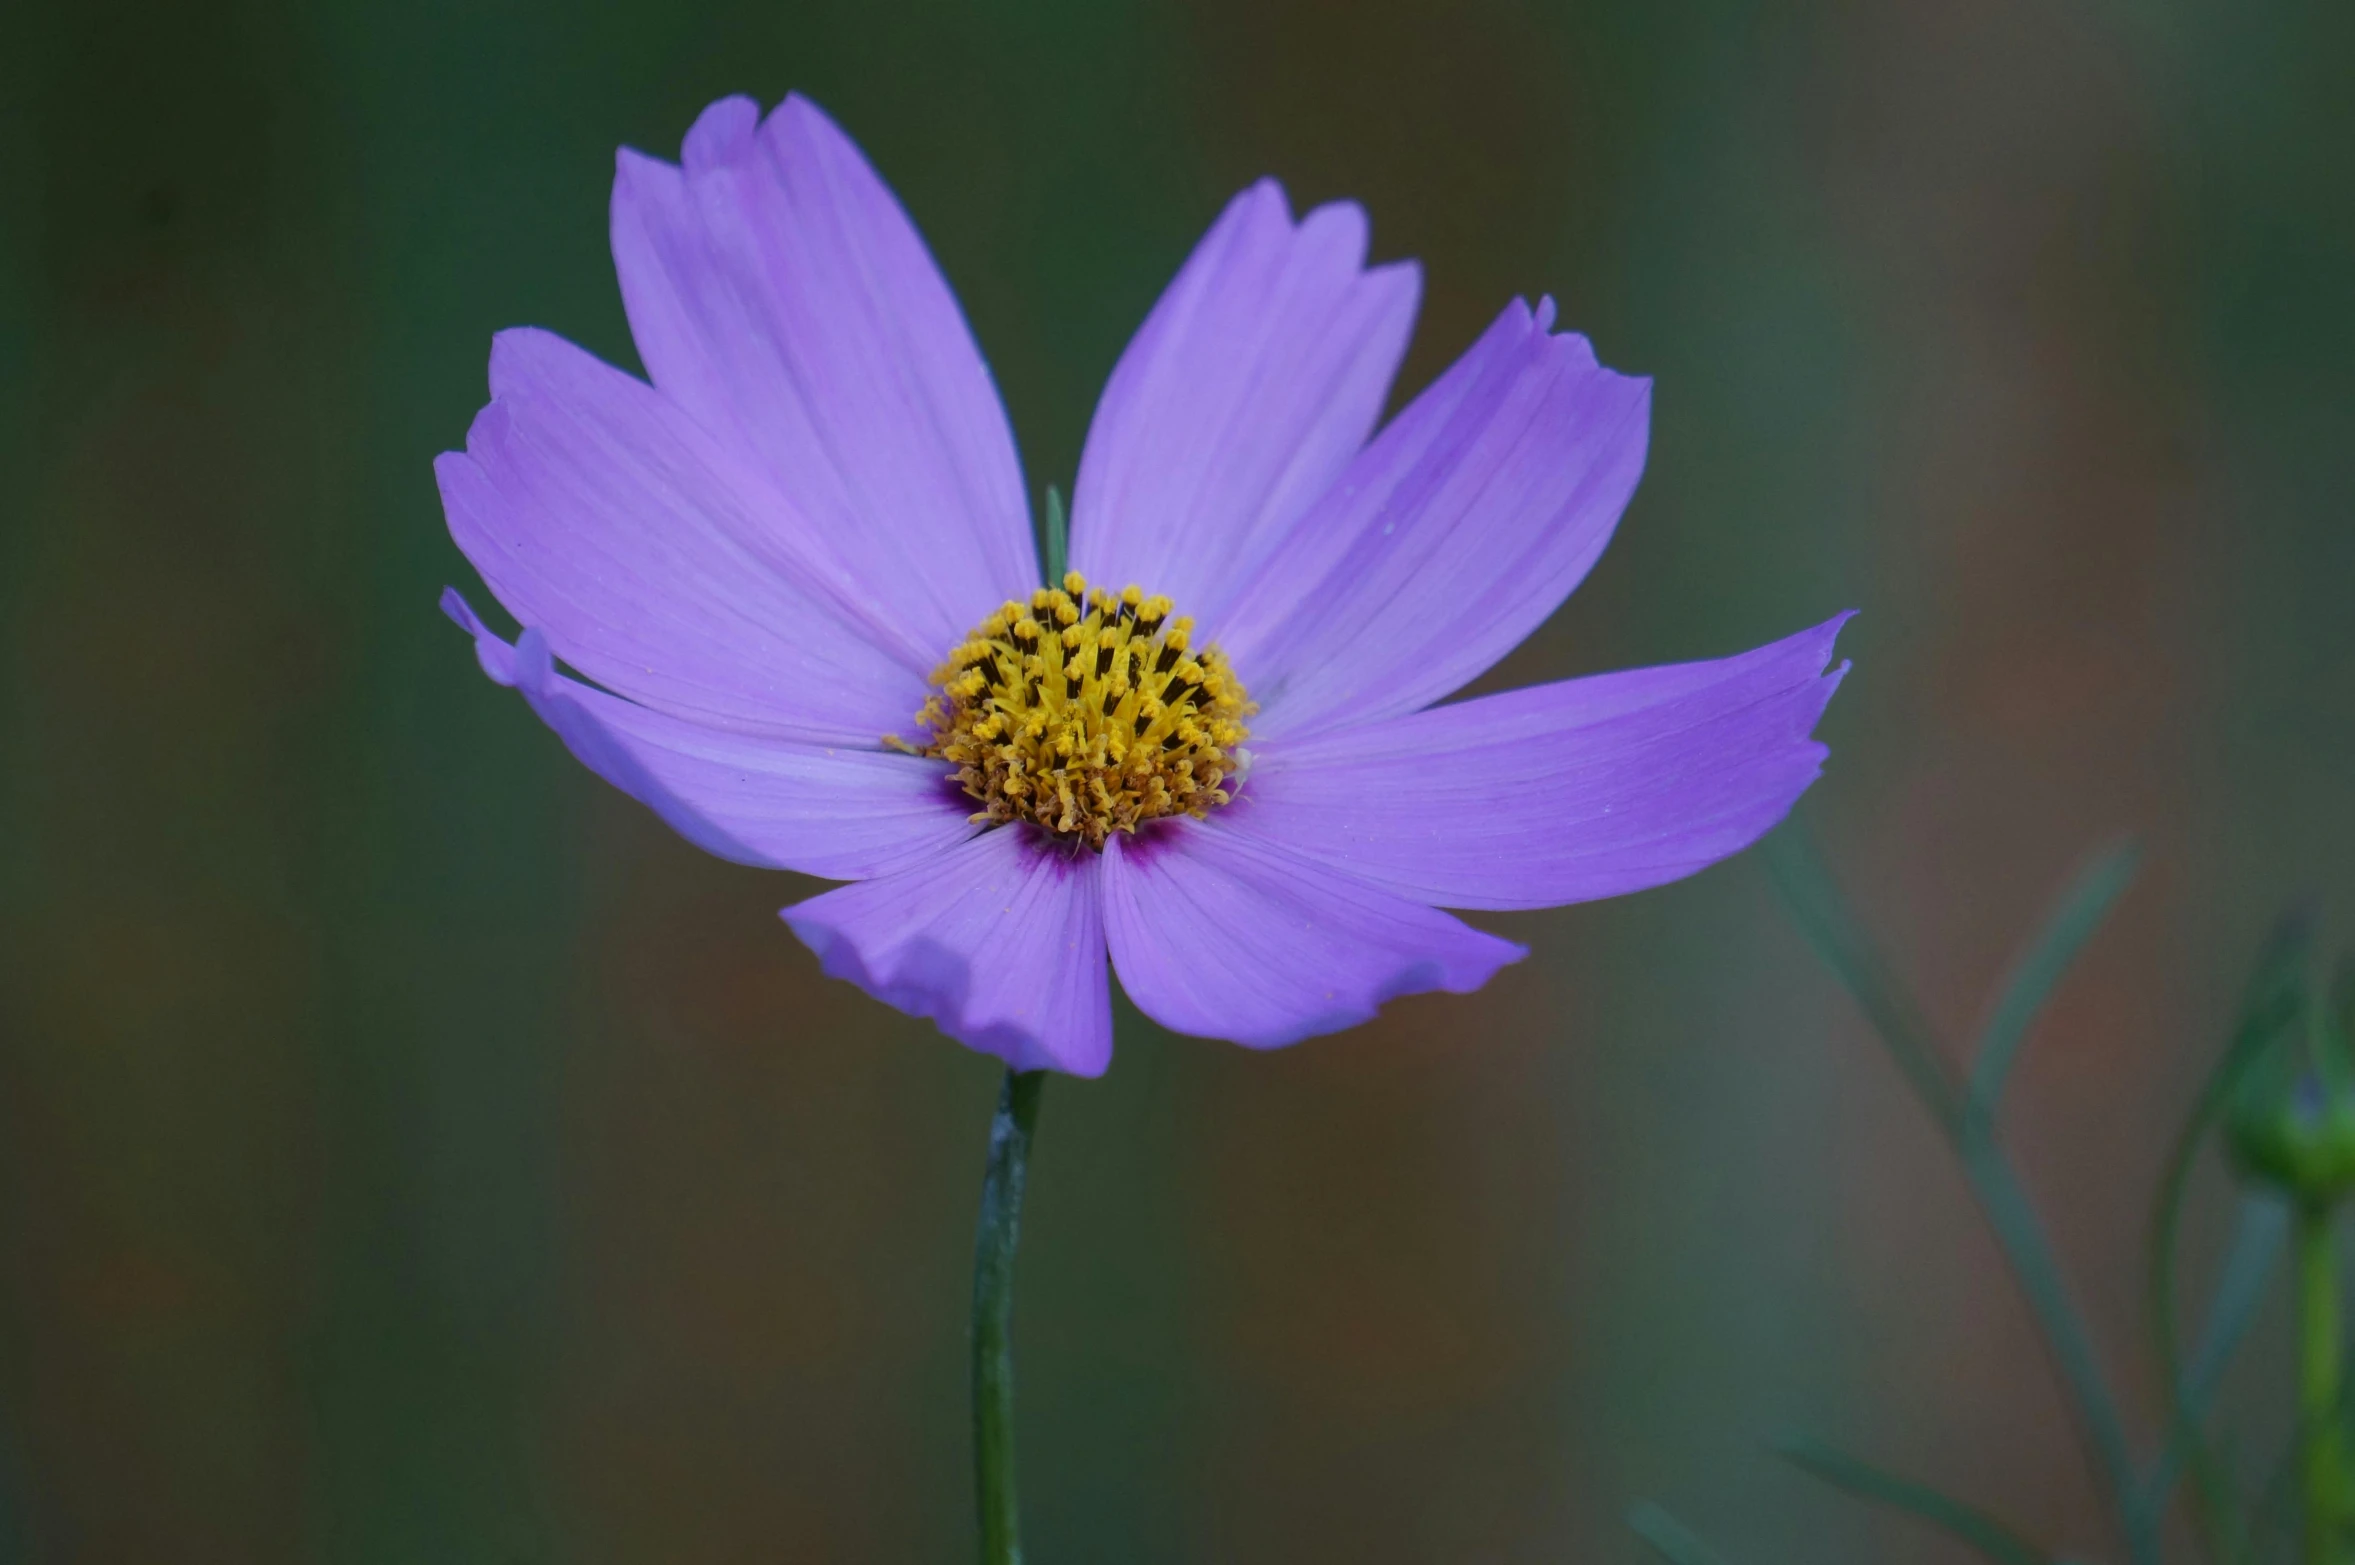 a small purple flower with yellow stamens in a field